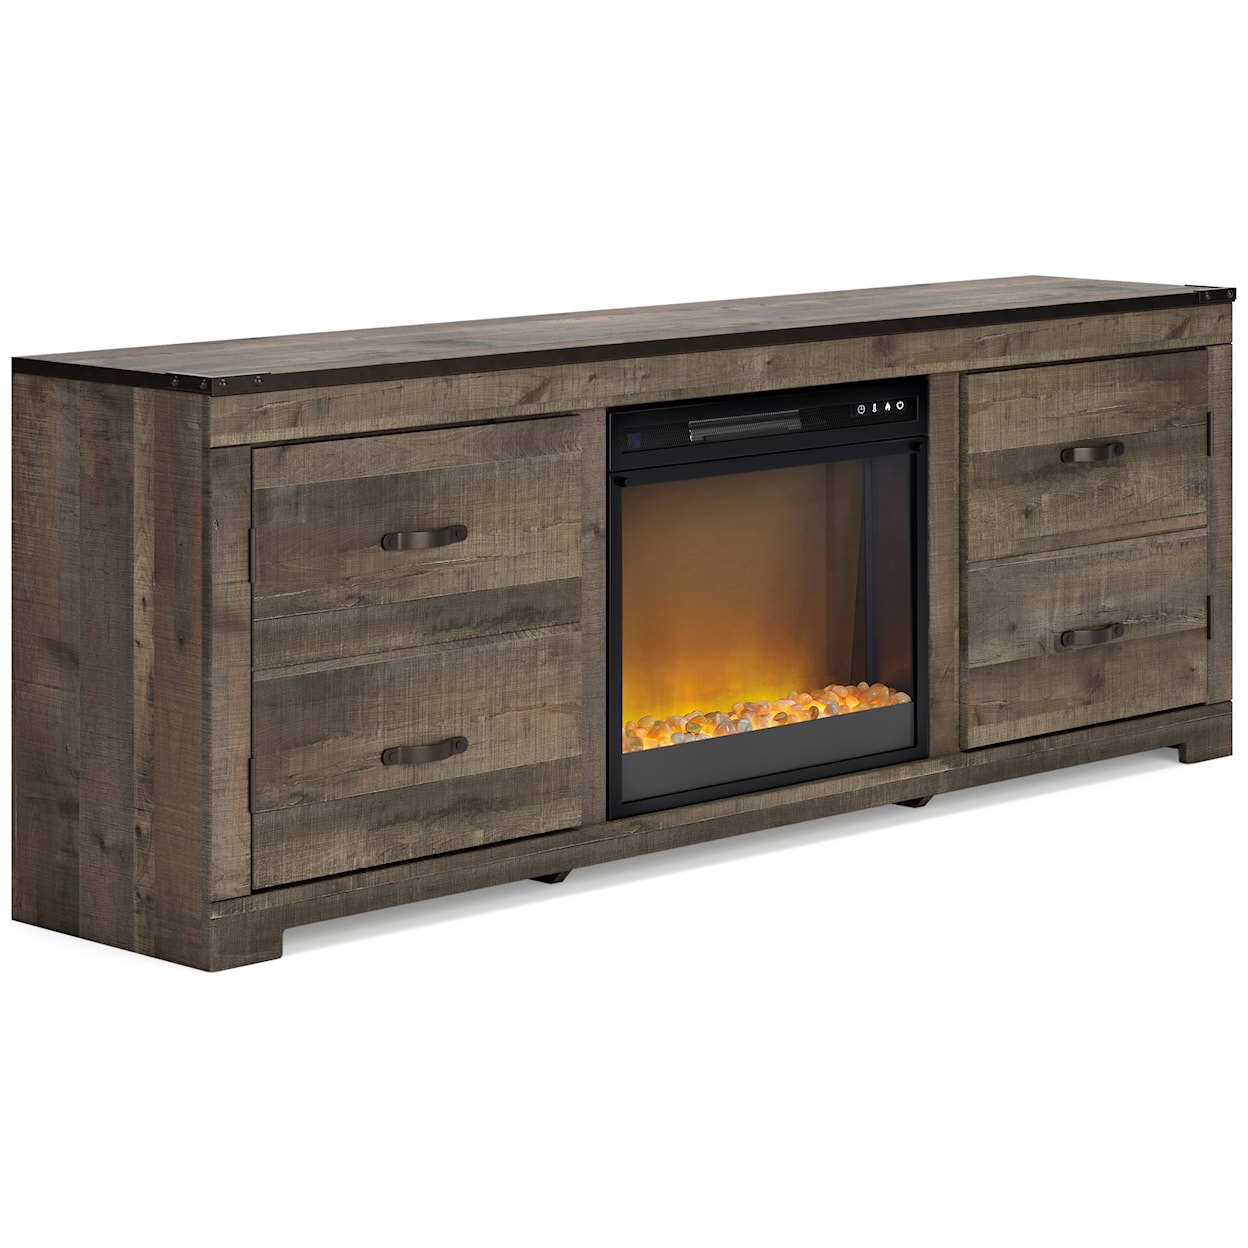 Signature Design by Ashley Trinell TV Stand with Fireplace